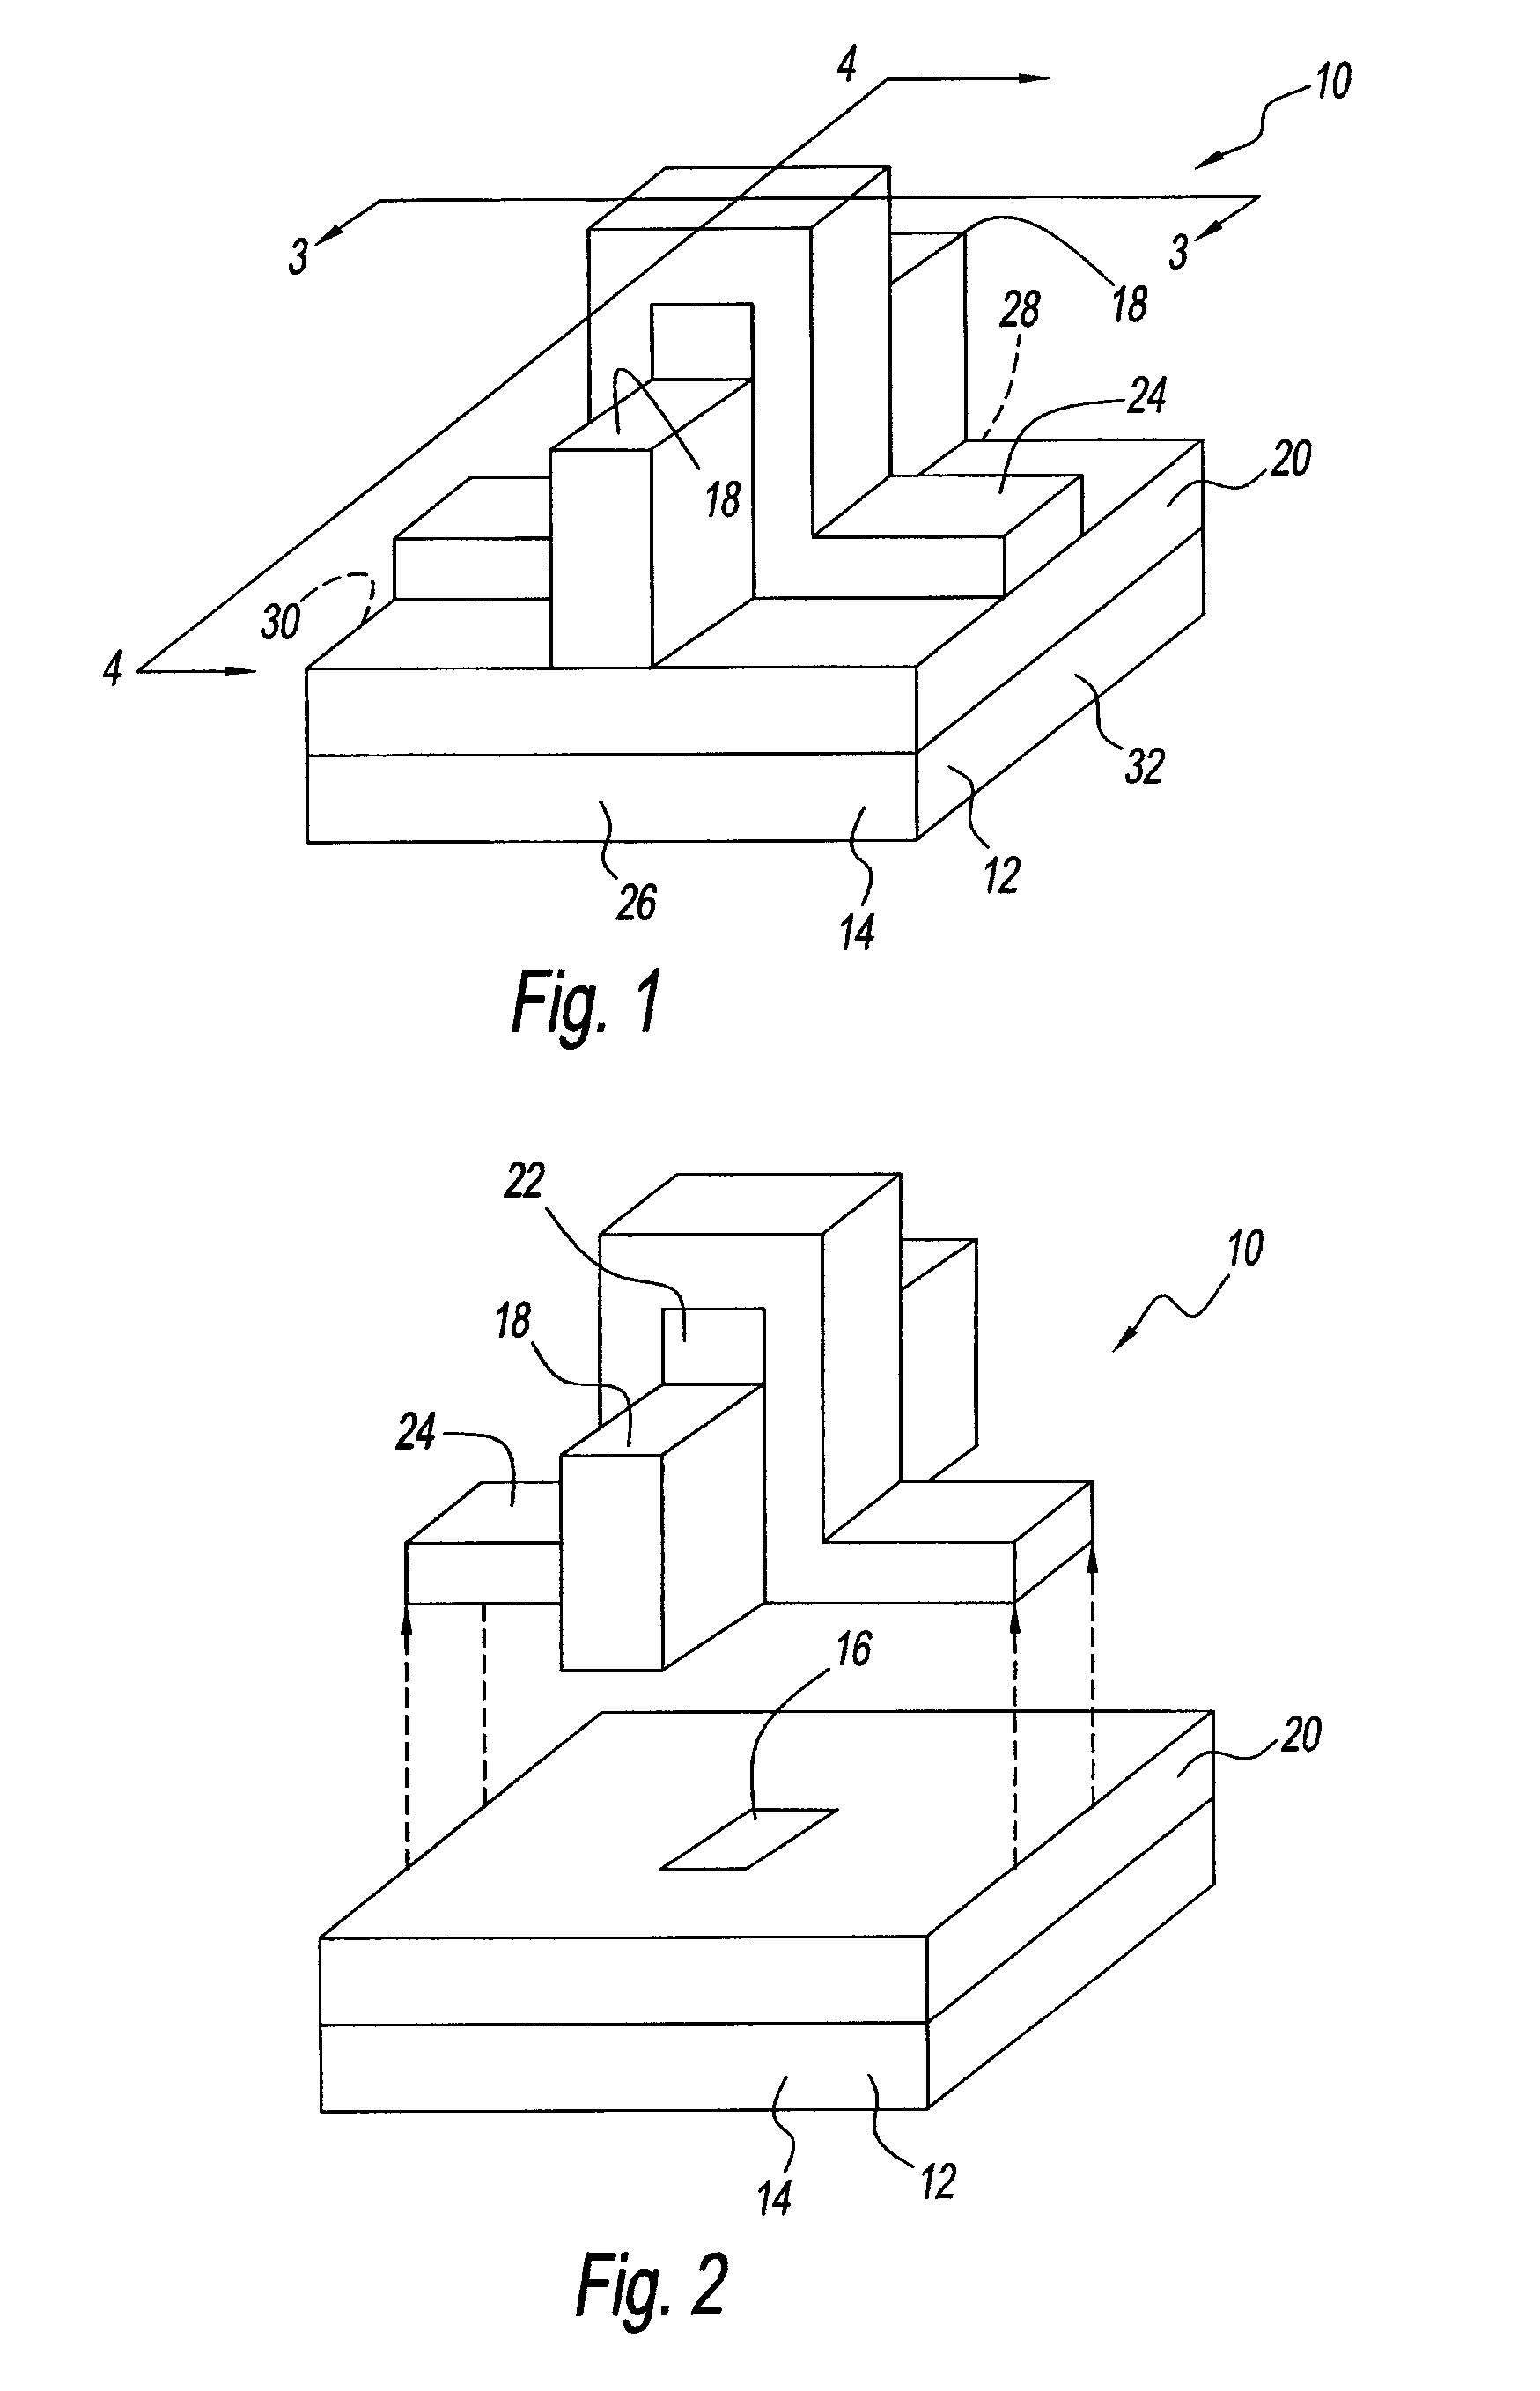 Process for making FinFET device with body contact and buried oxide junction isolation